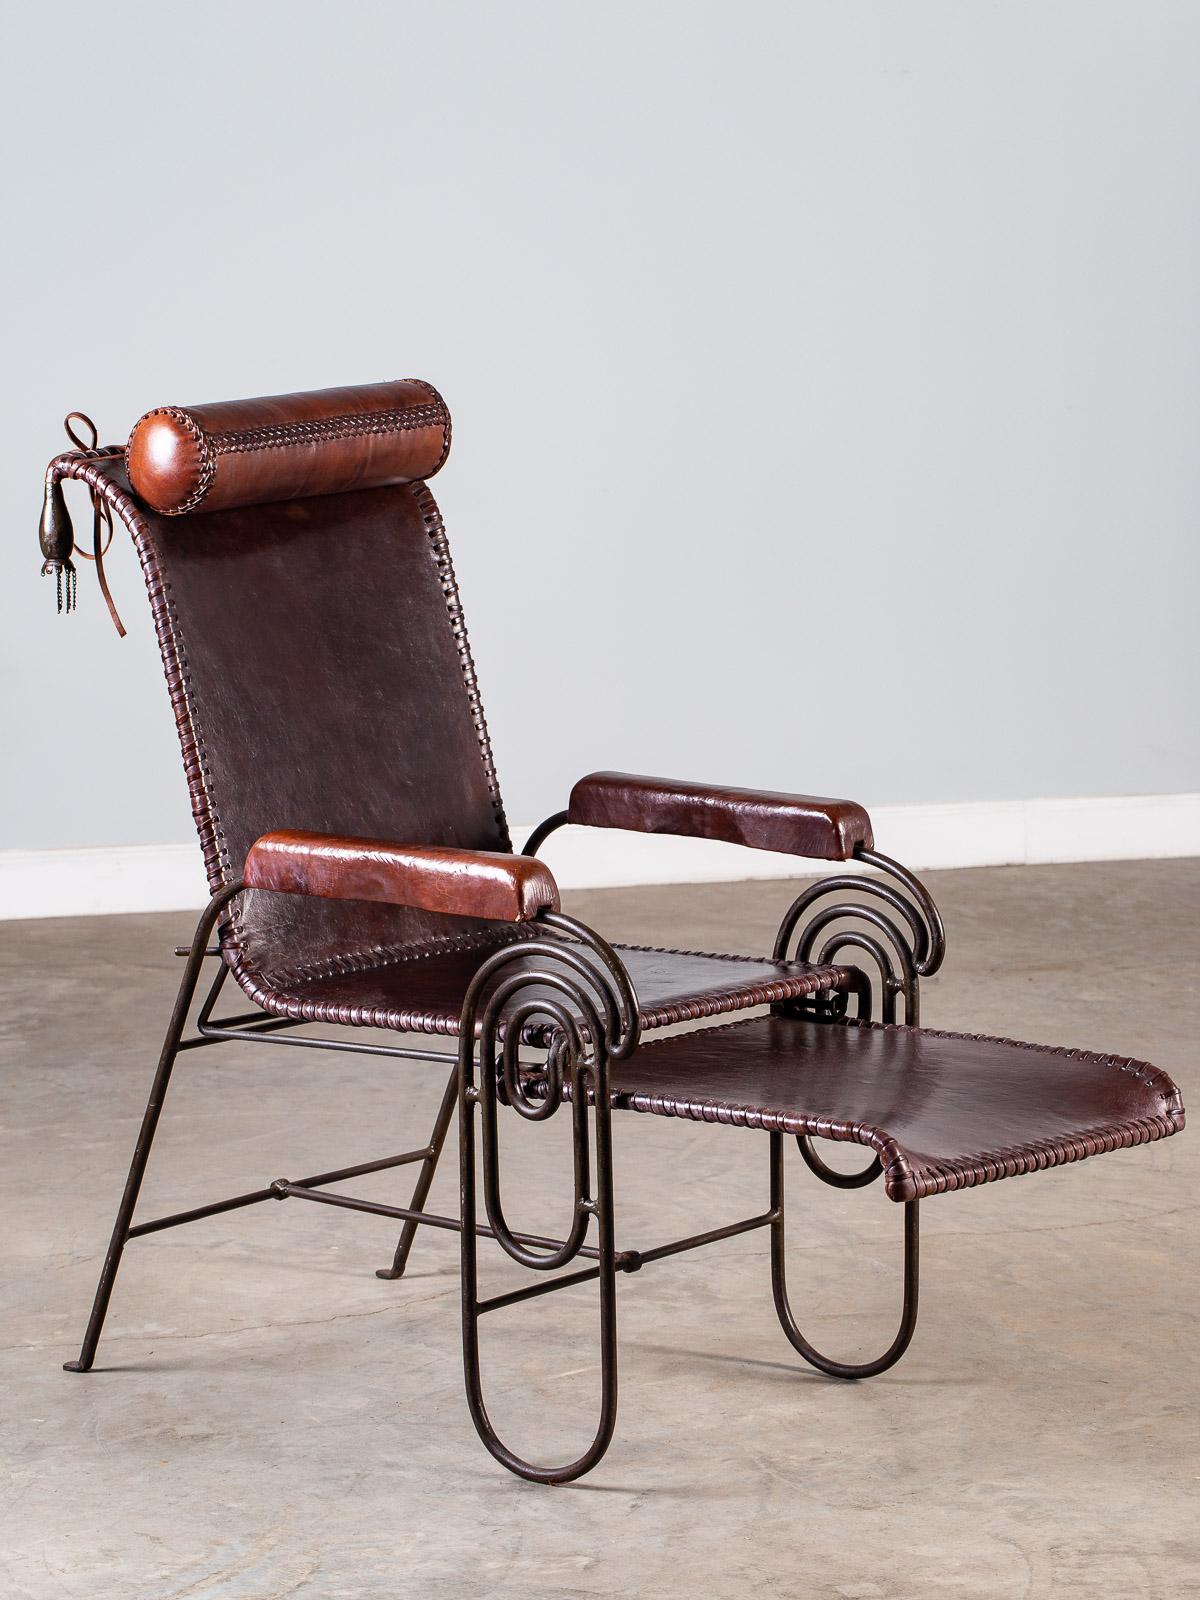 A fantastic vintage Spanish solid iron and leather armchair circa 1950 having a pull out extension as well as a full size roll pillow. This unique chair has a striking silhouette when seen from every direction. Because the frame is made from solid